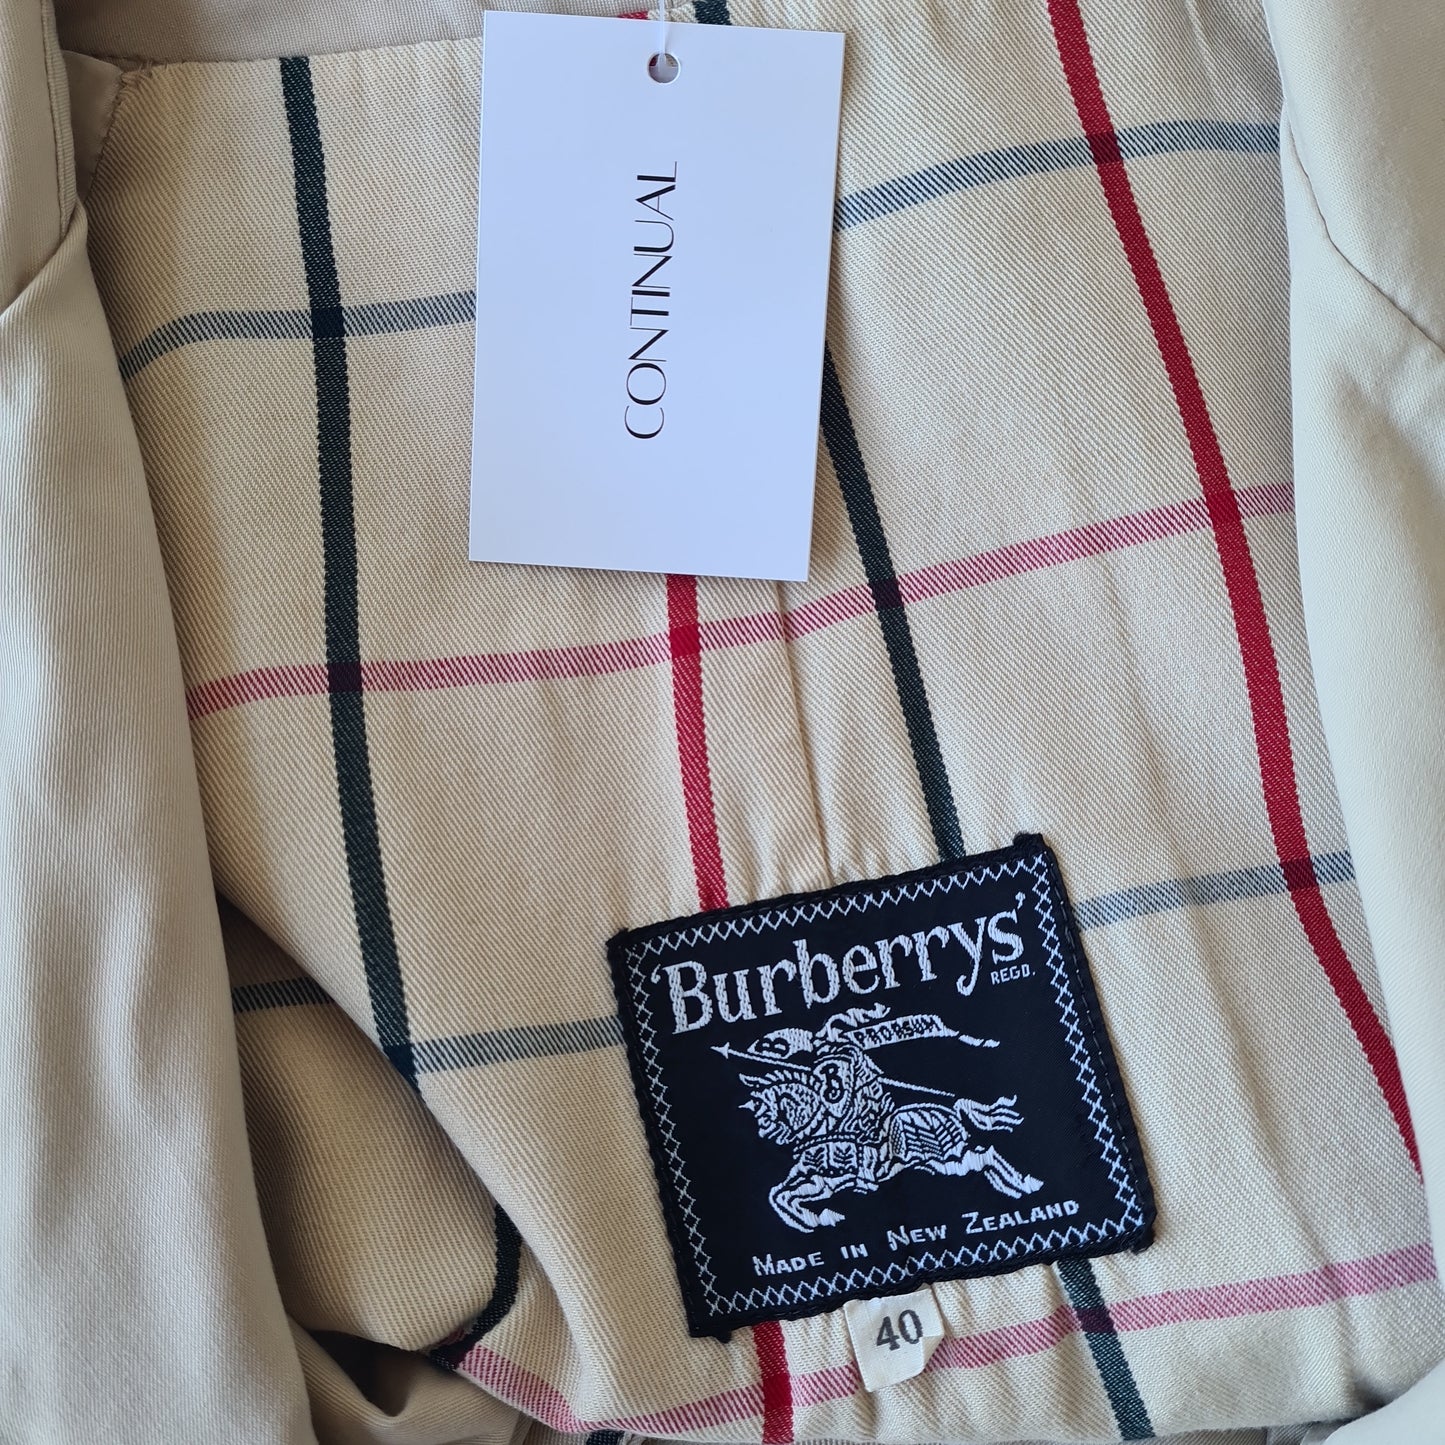 Classic Burberry's Trench